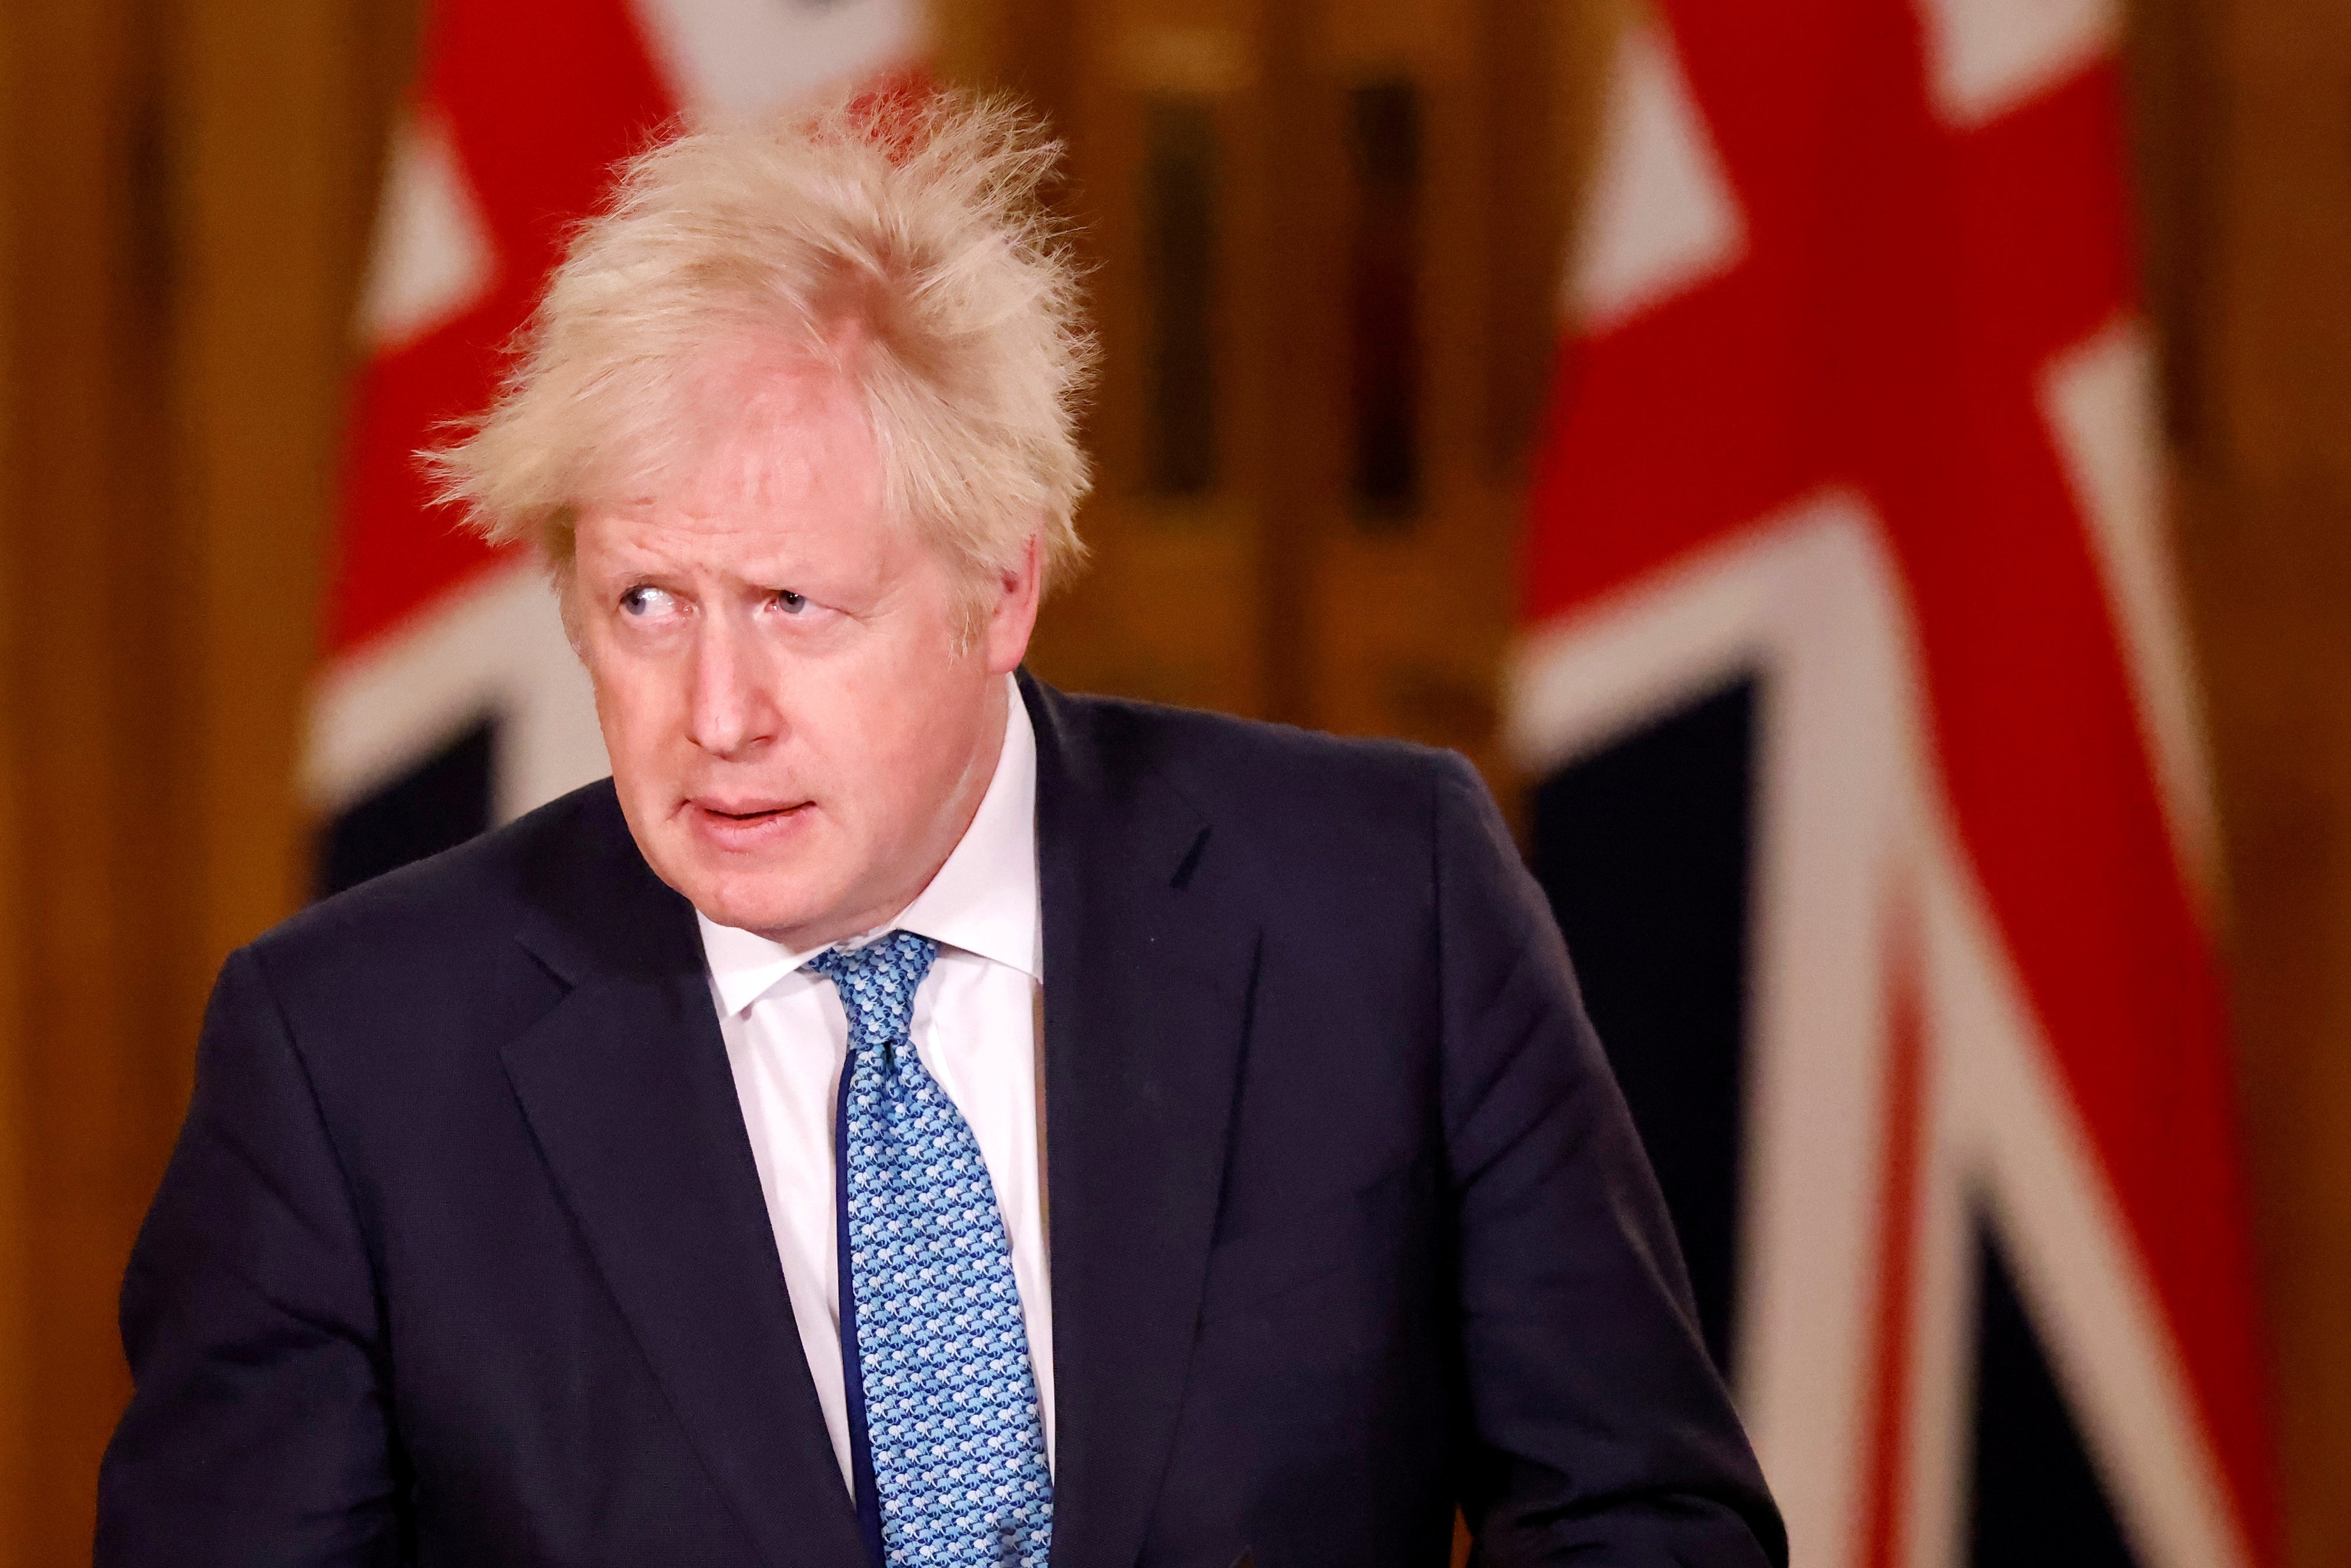 Johnson had nothing but bad news to announce at his briefing on Monday – not that he seemed fazed